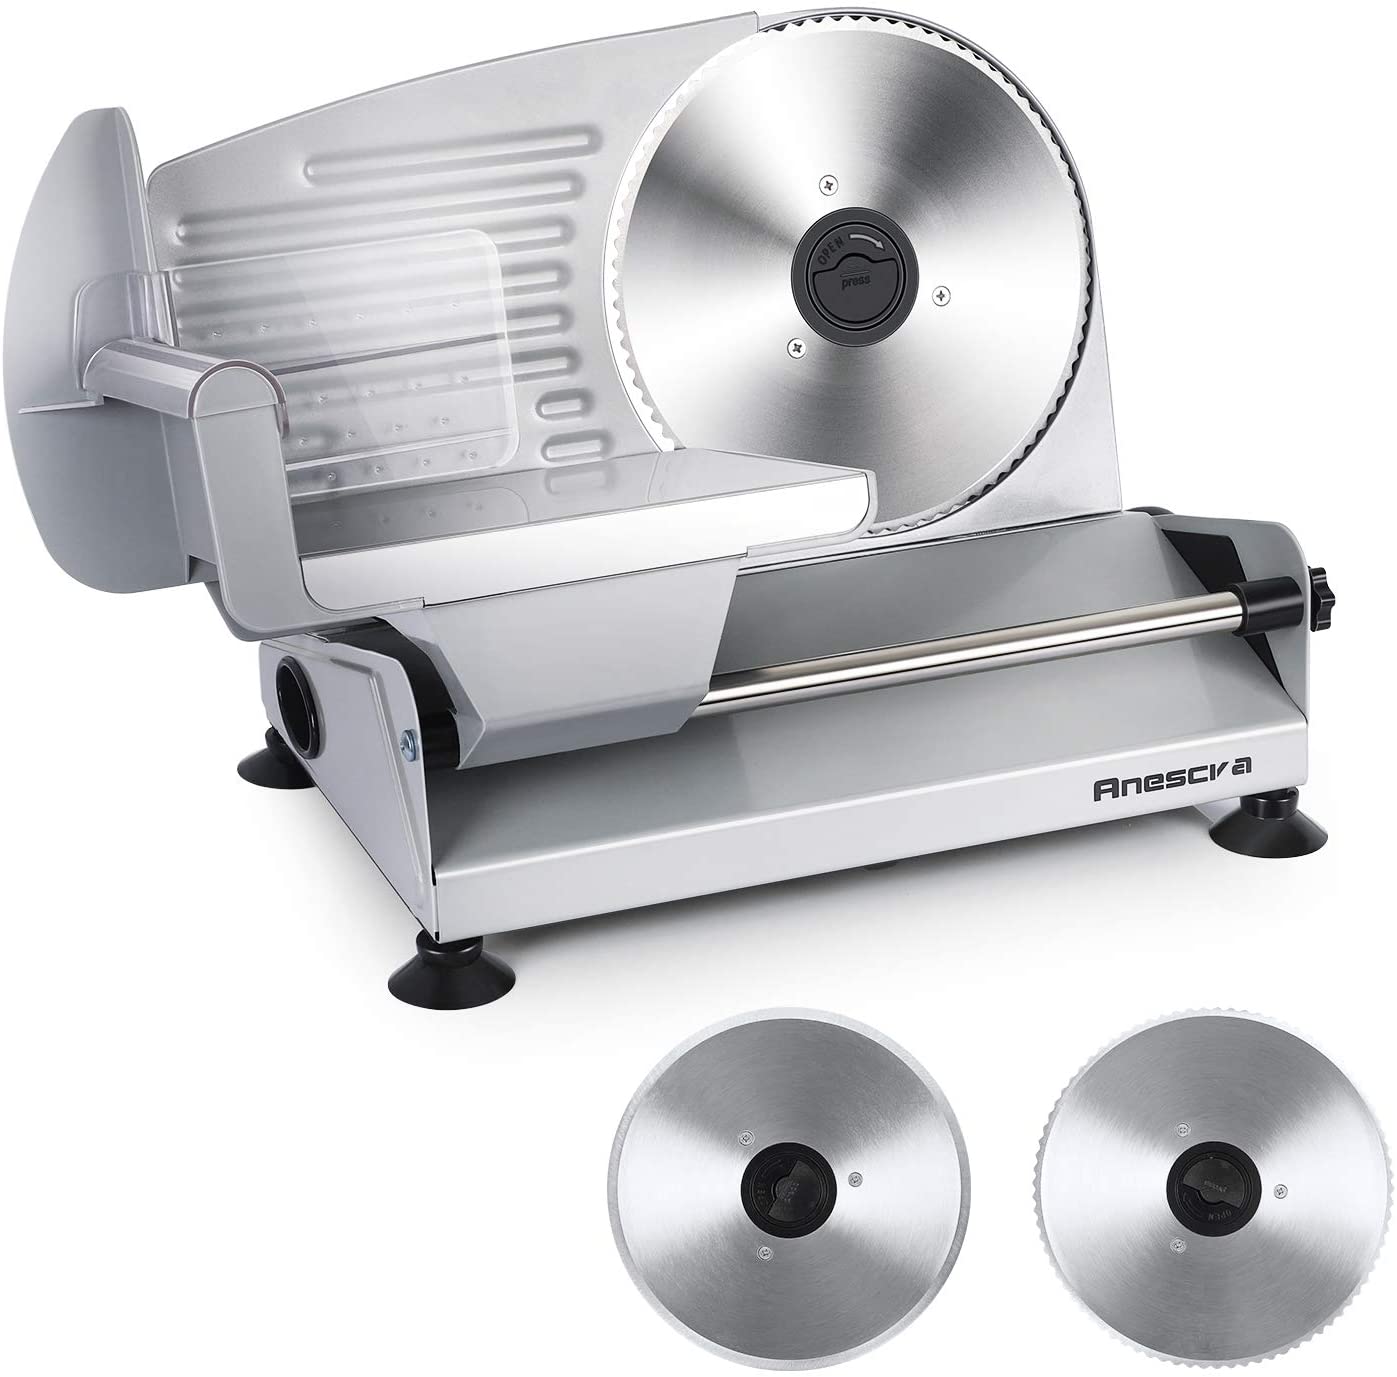 home bread slicer electric